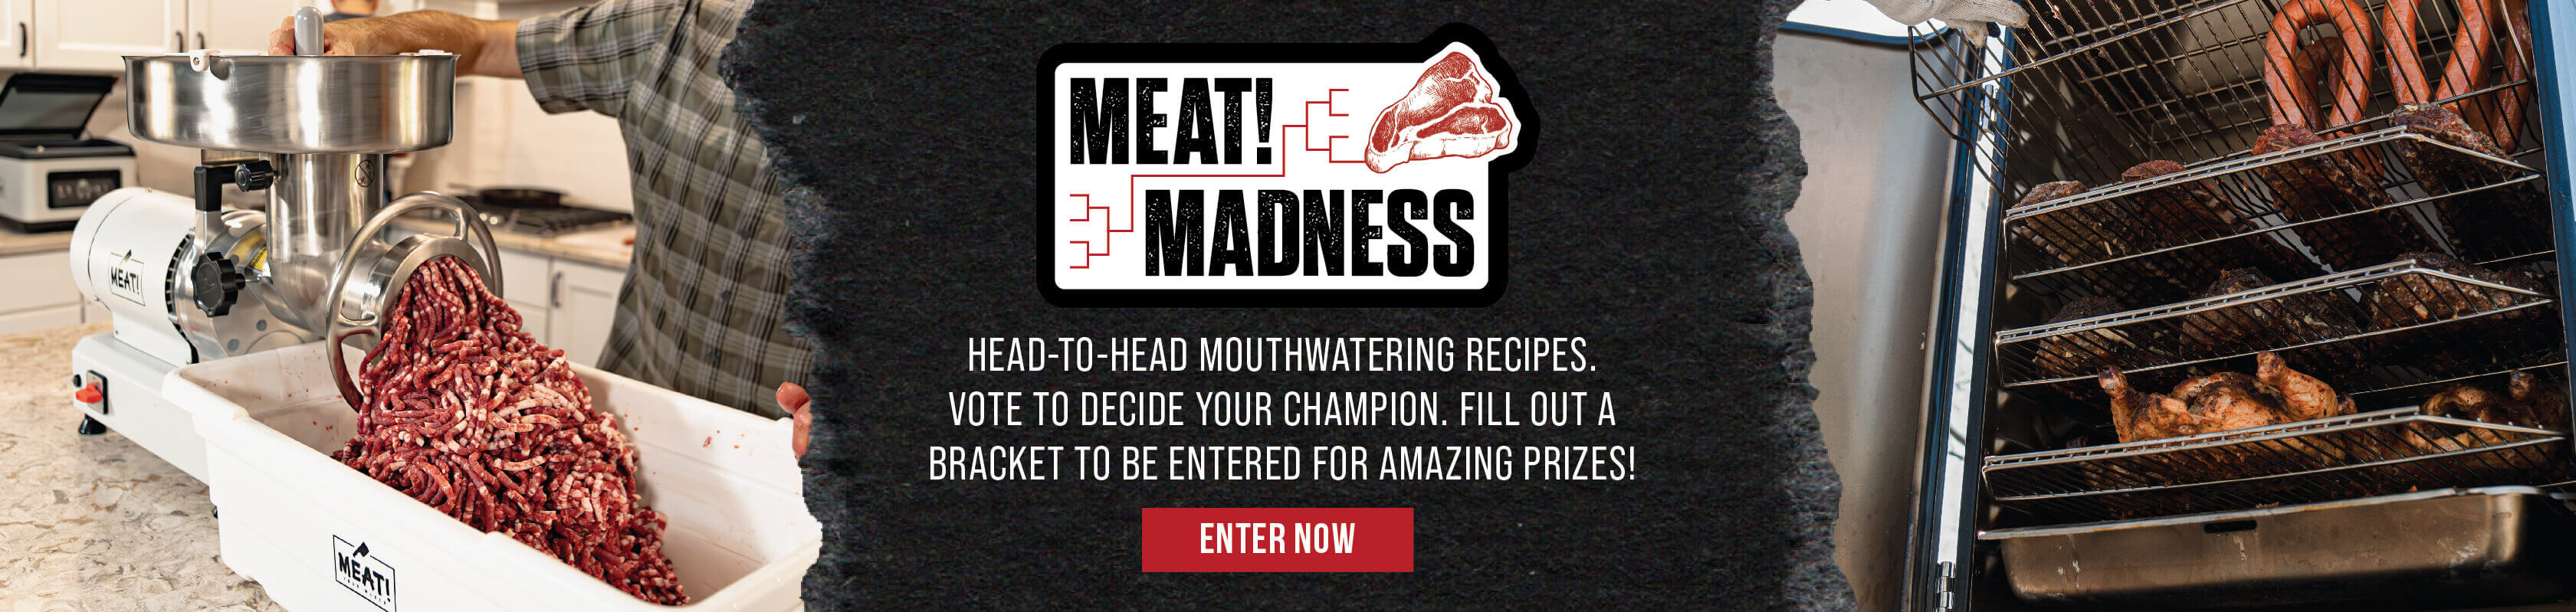 MEAT! Madness